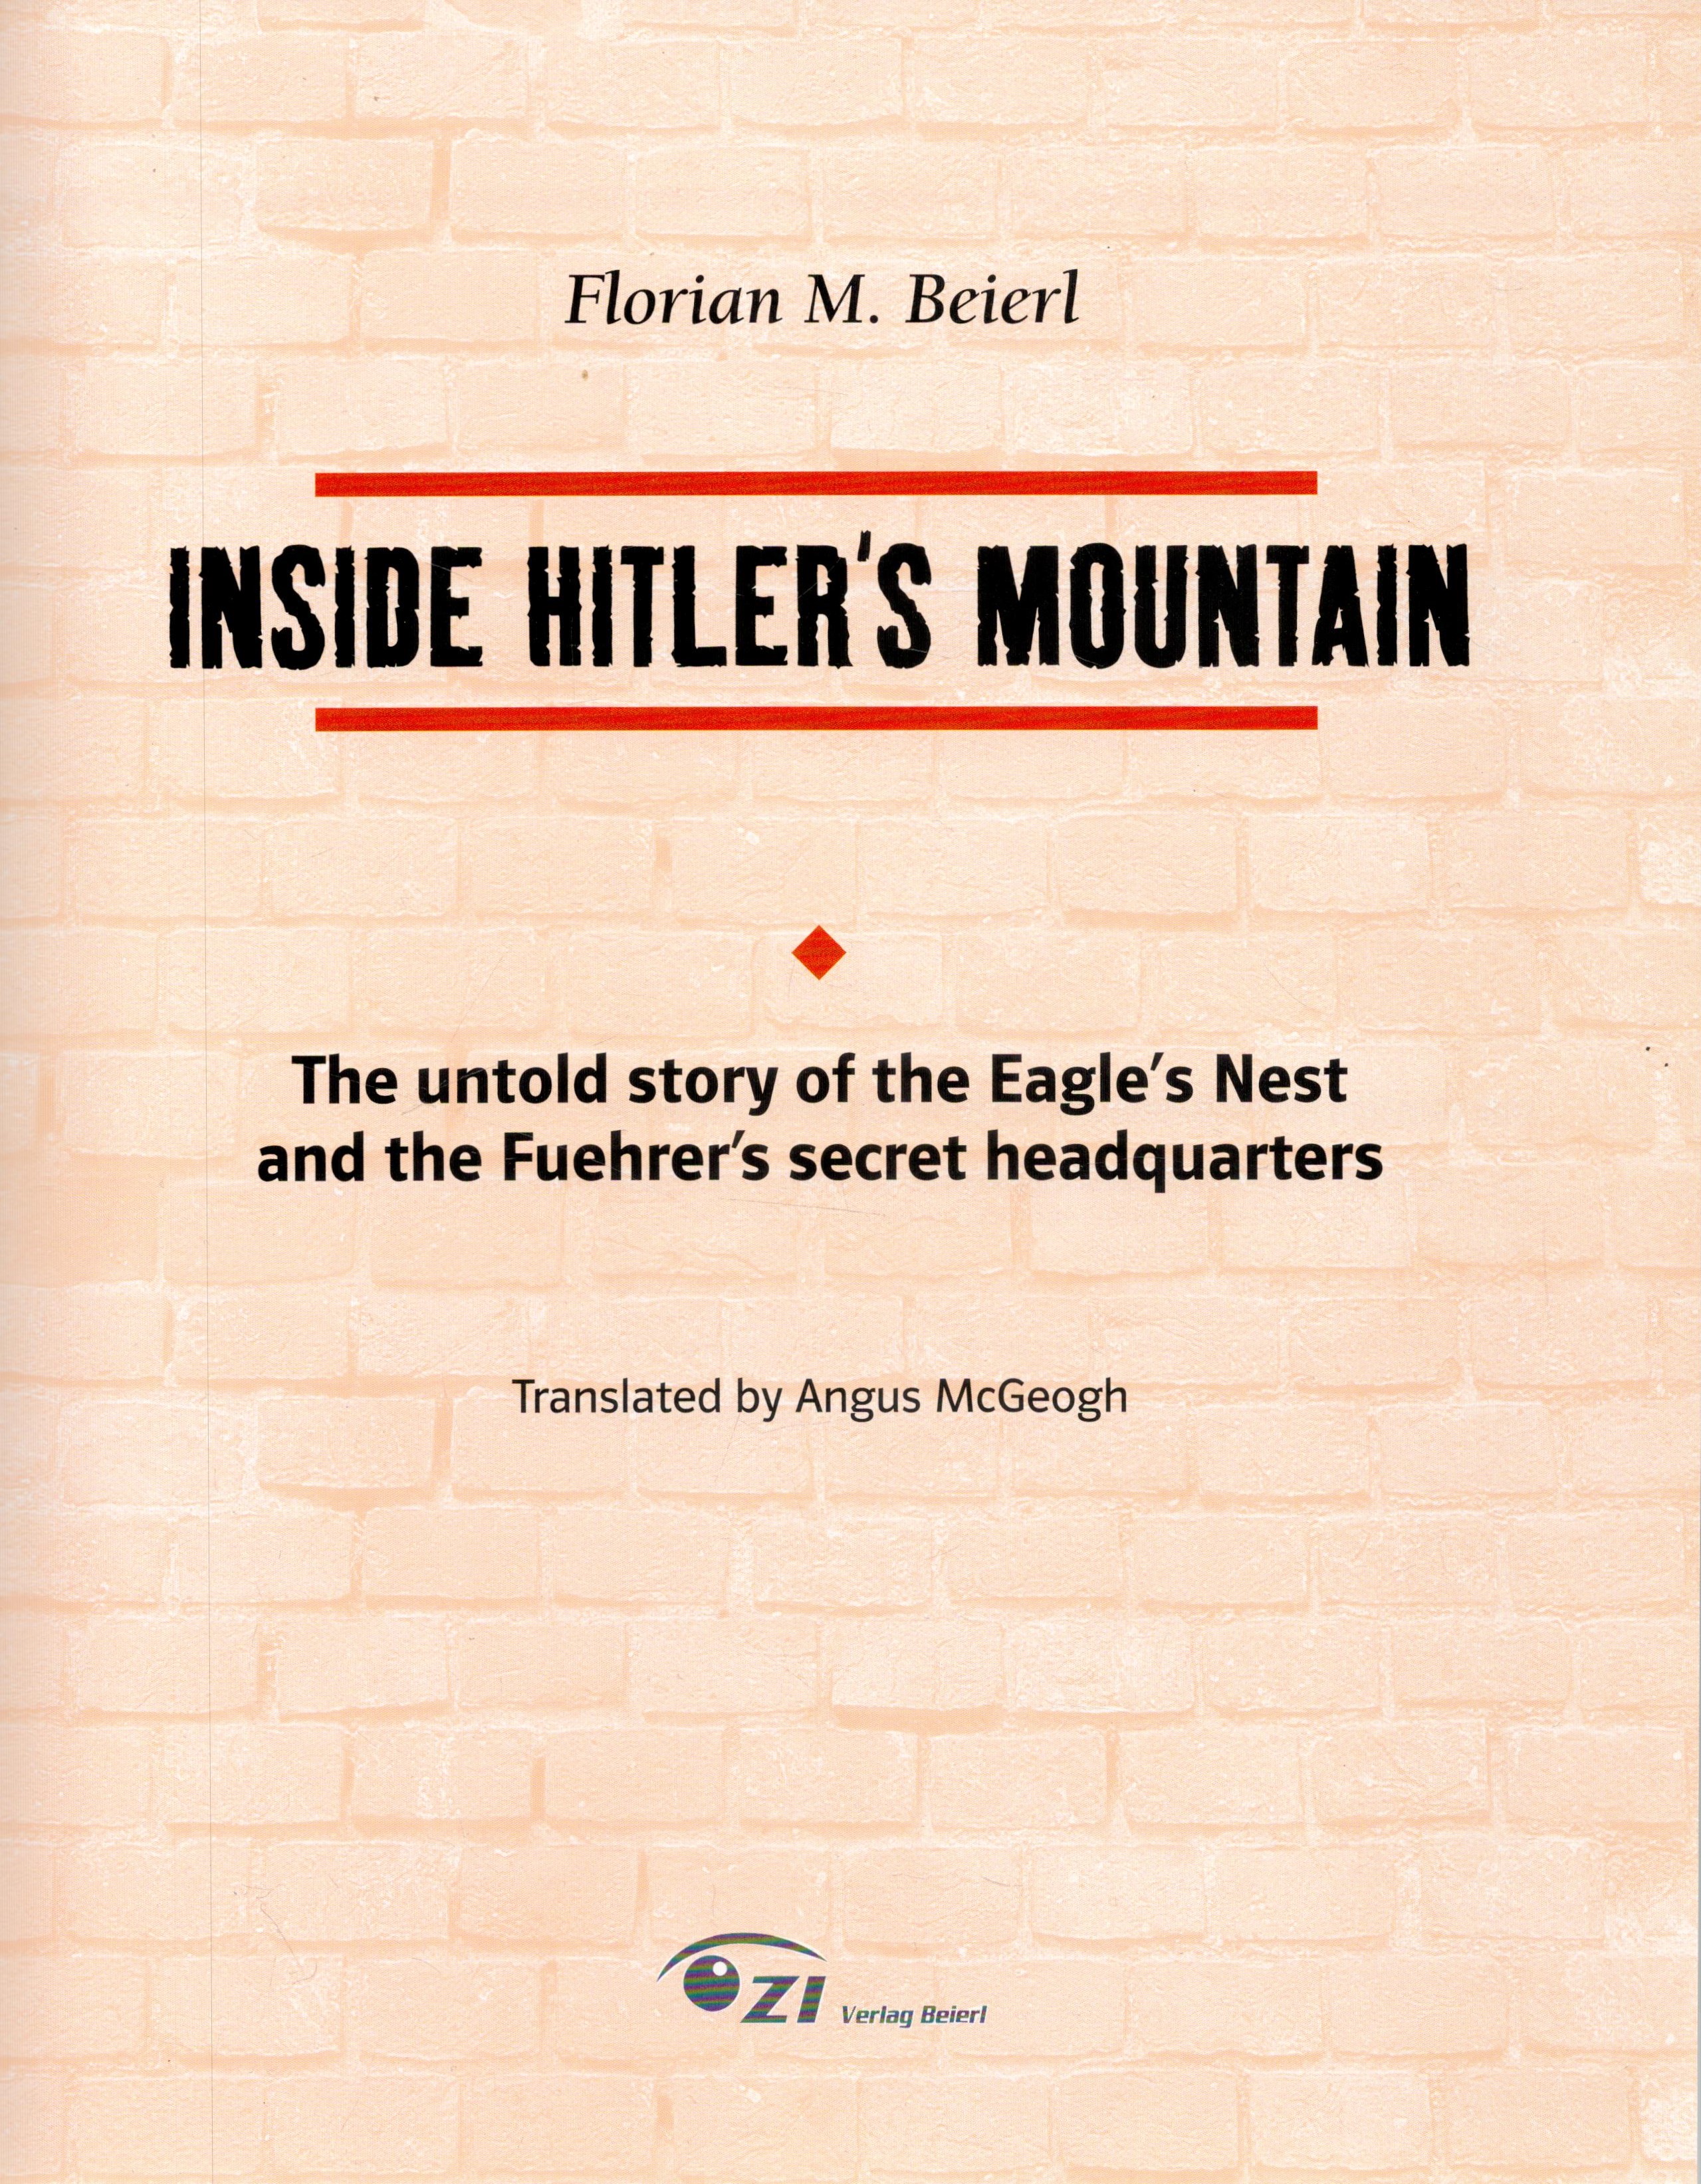 Inside Hitler's Mountain- The Untold Story of the Eagles Nest and the Fuehrers Secret Headquarters - Image 2 of 3